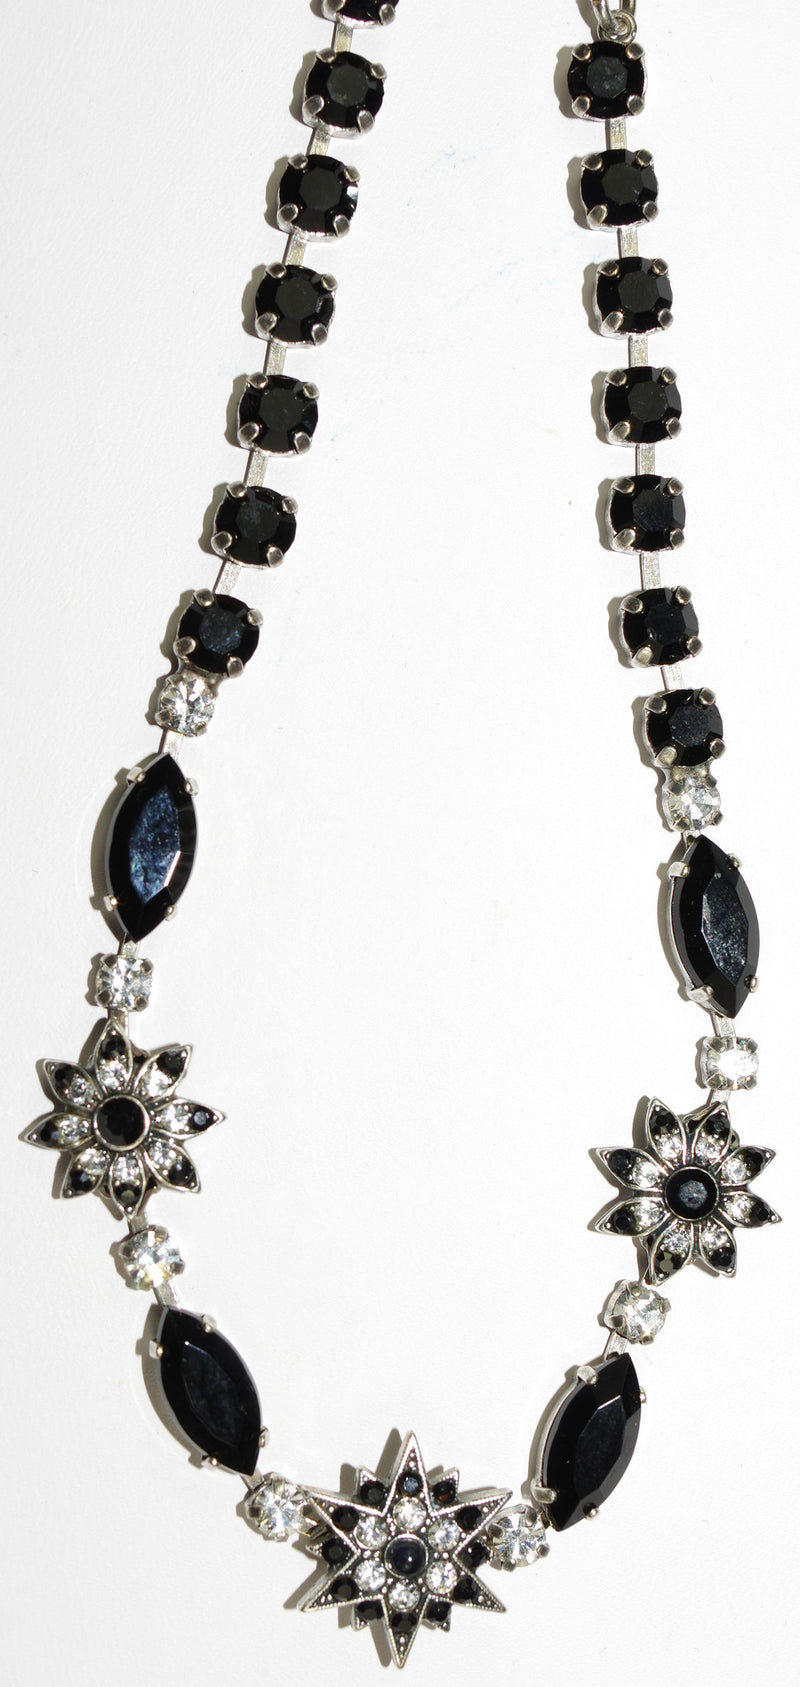 MARIANA NECKLACE CHECKMATE: black, clear stones in silver setting, 17" adjustable chain